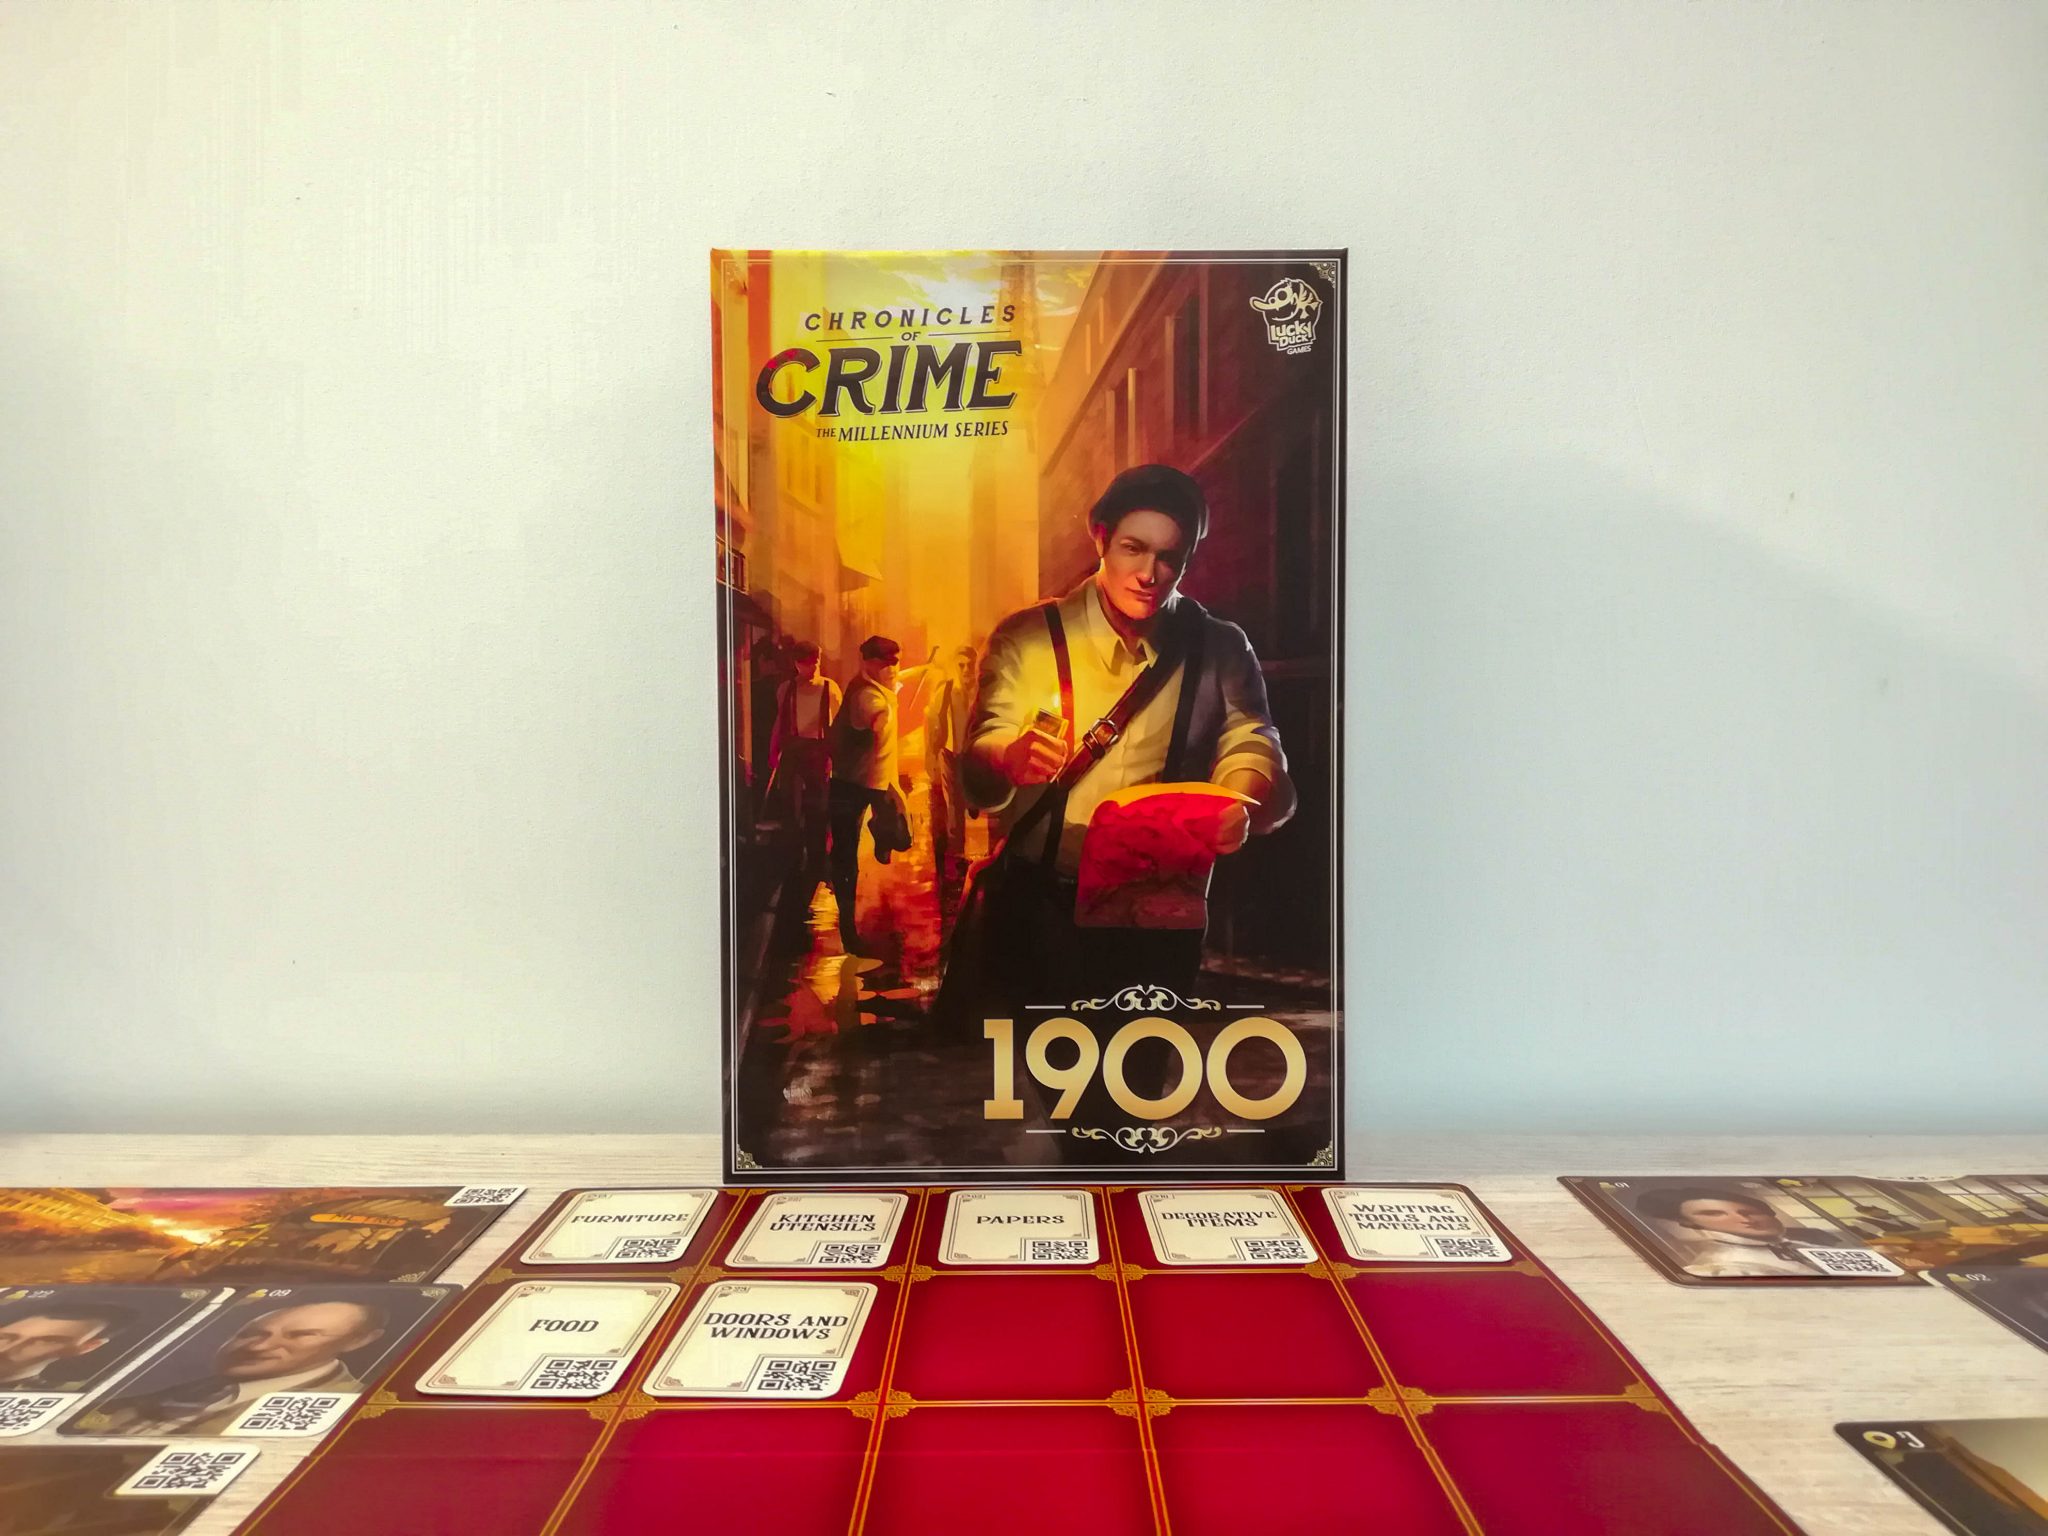 chronicles-of-crime-1900-journal-entry-25-board-games-journal